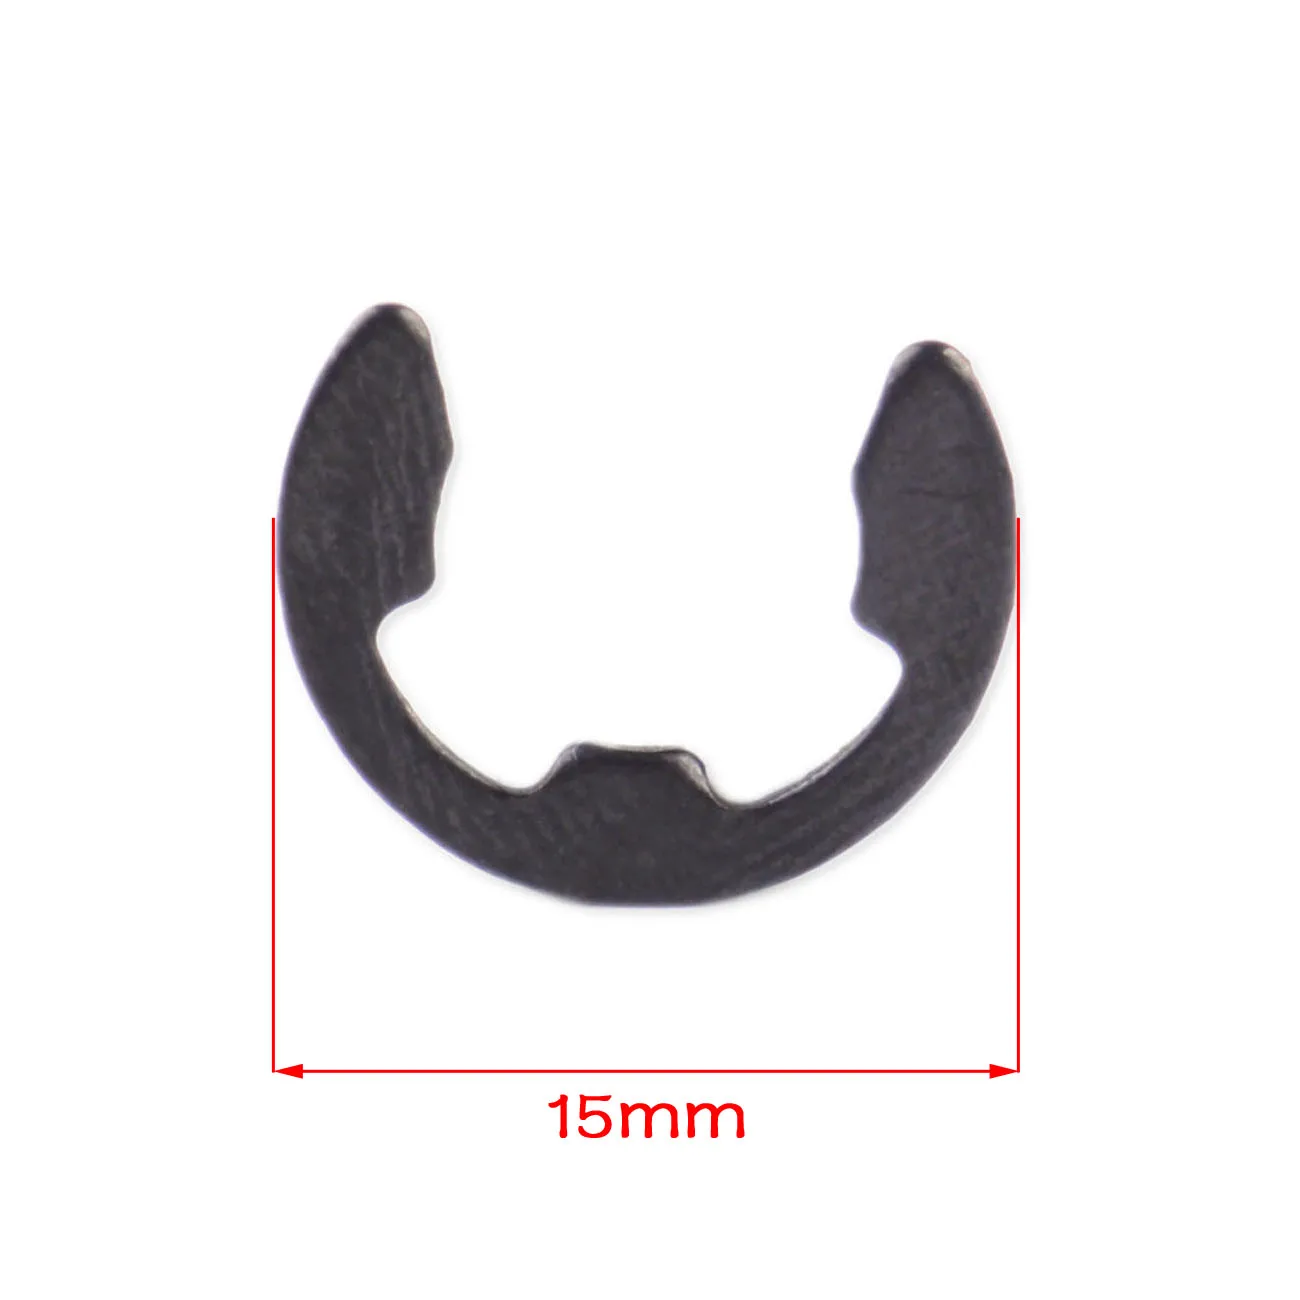 E-Clip (1) 8 x 1.3mm (Clutch) For- STIHL MS170 MS180 017 018 - 025 MS210 MS230 MS250 021 023  Chainsaw Parts 9460 624 0801